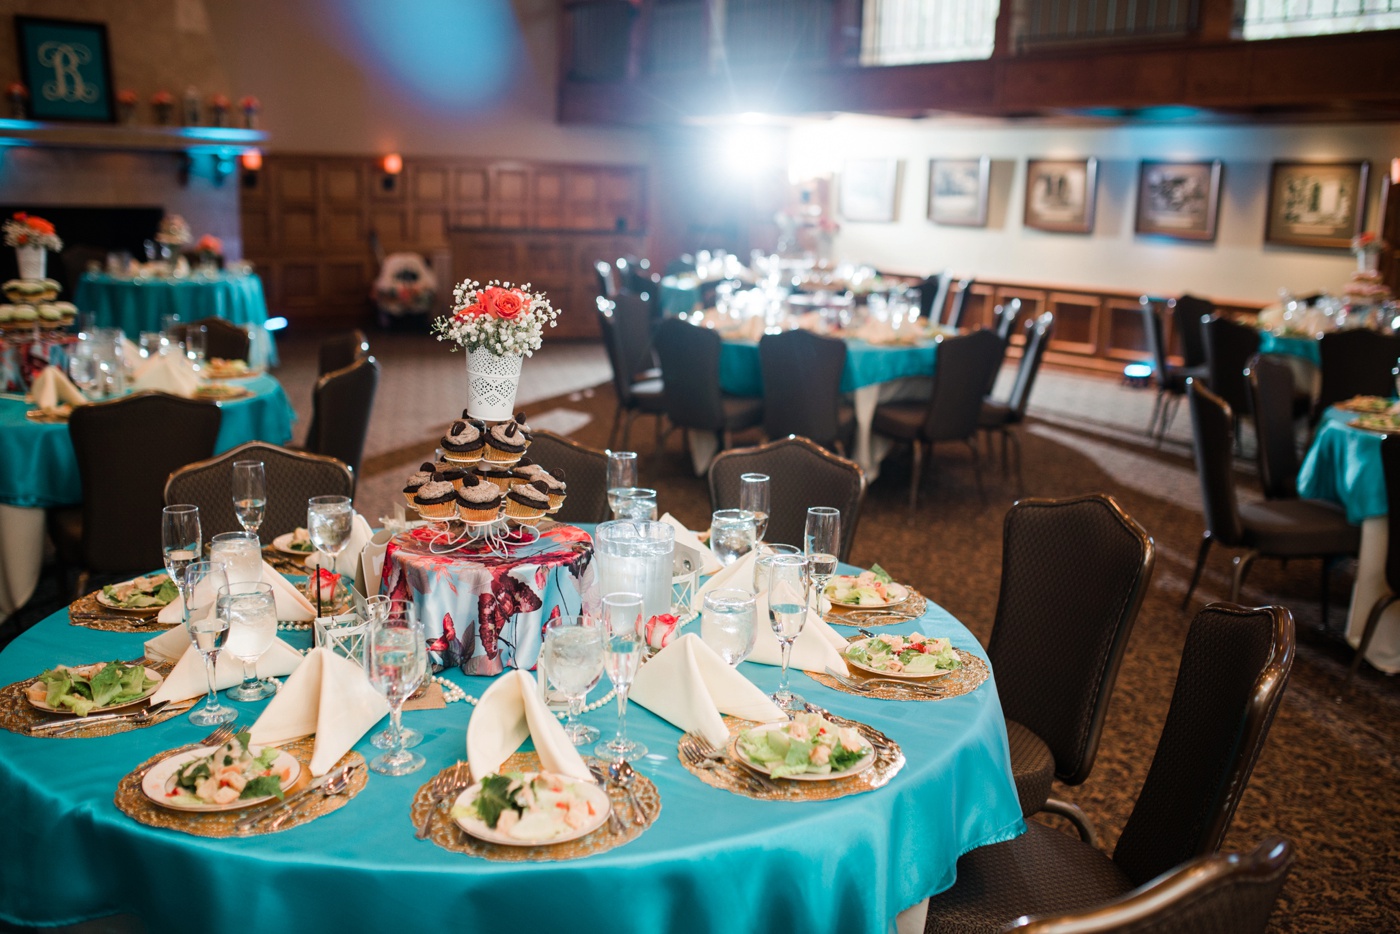 Teal Tablecloth - Cupcake Tower Wedding Centerpiece - Moorestown Community House Wedding Reception photo photo